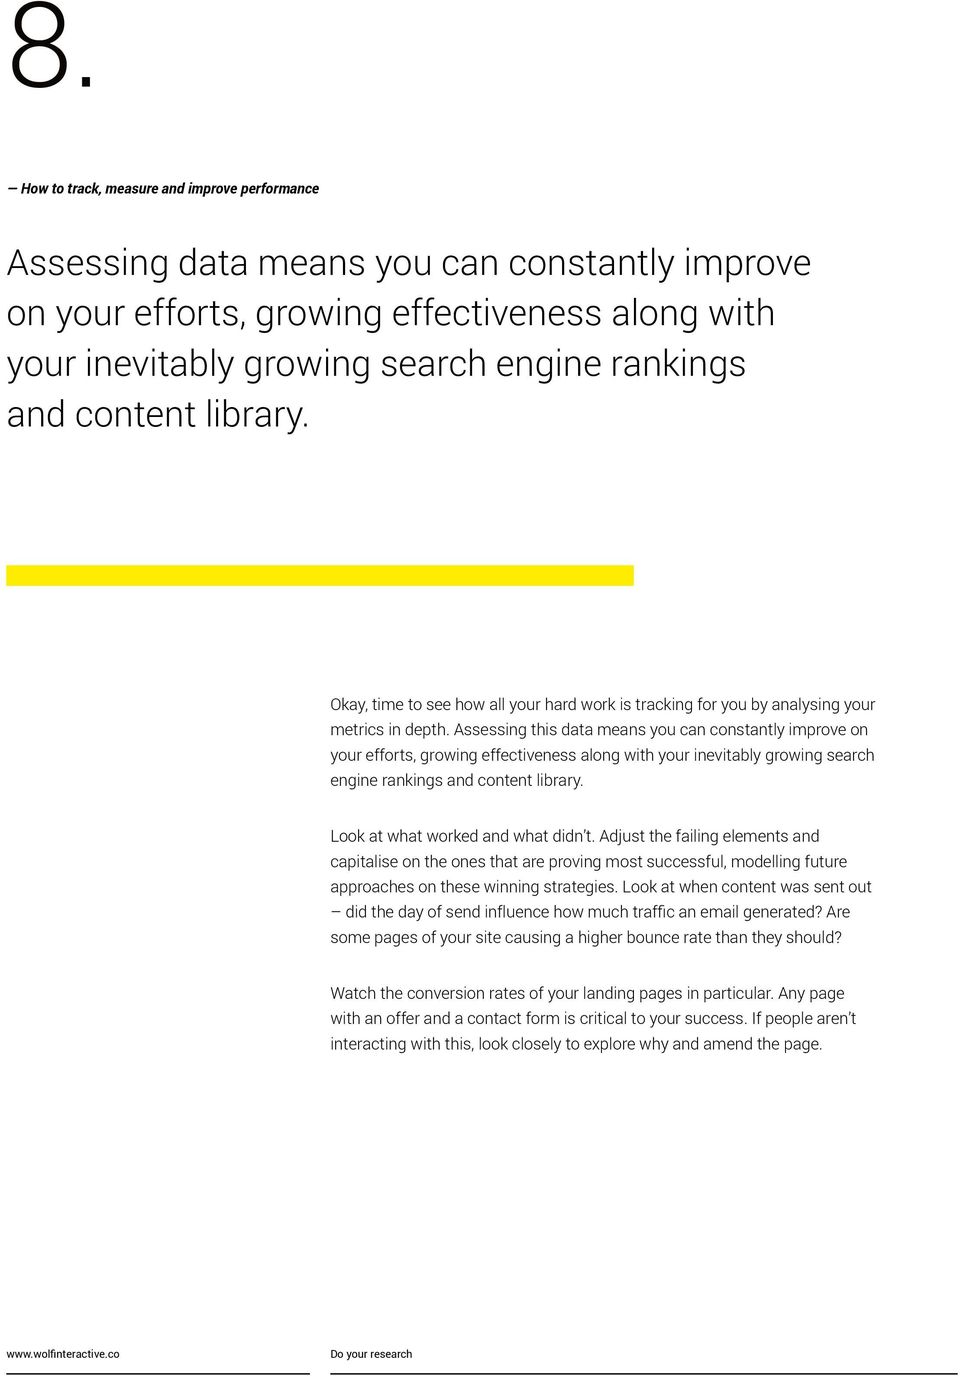 Assessing this data means you can constantly improve on your efforts, growing effectiveness along with your inevitably growing search engine rankings and content library.